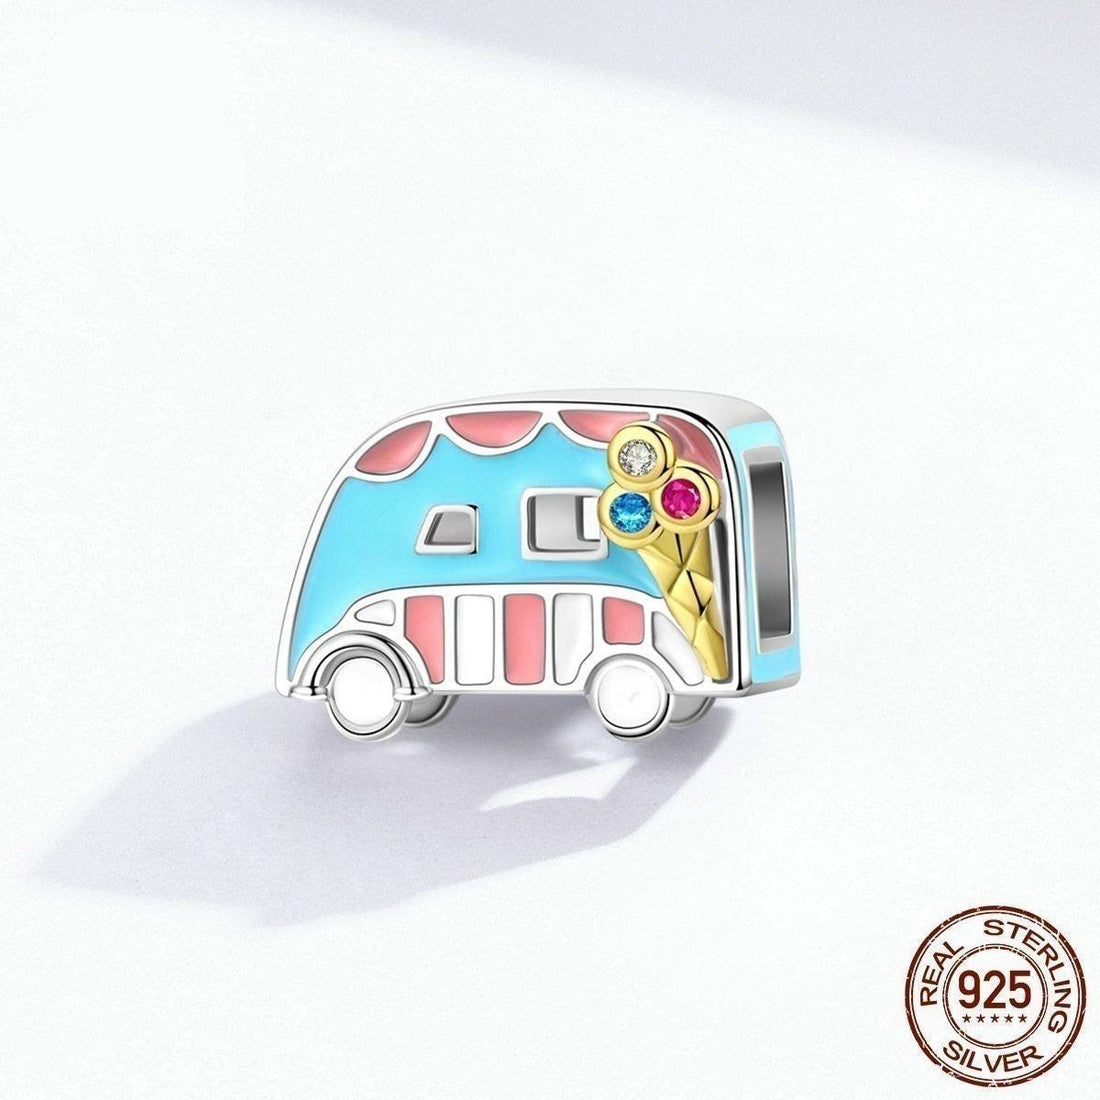 100% 925 Sterling Silver Ice-Cream Van Enamel Pendant Charm Jewelry WOS10 Without Chain - Touchy Style .